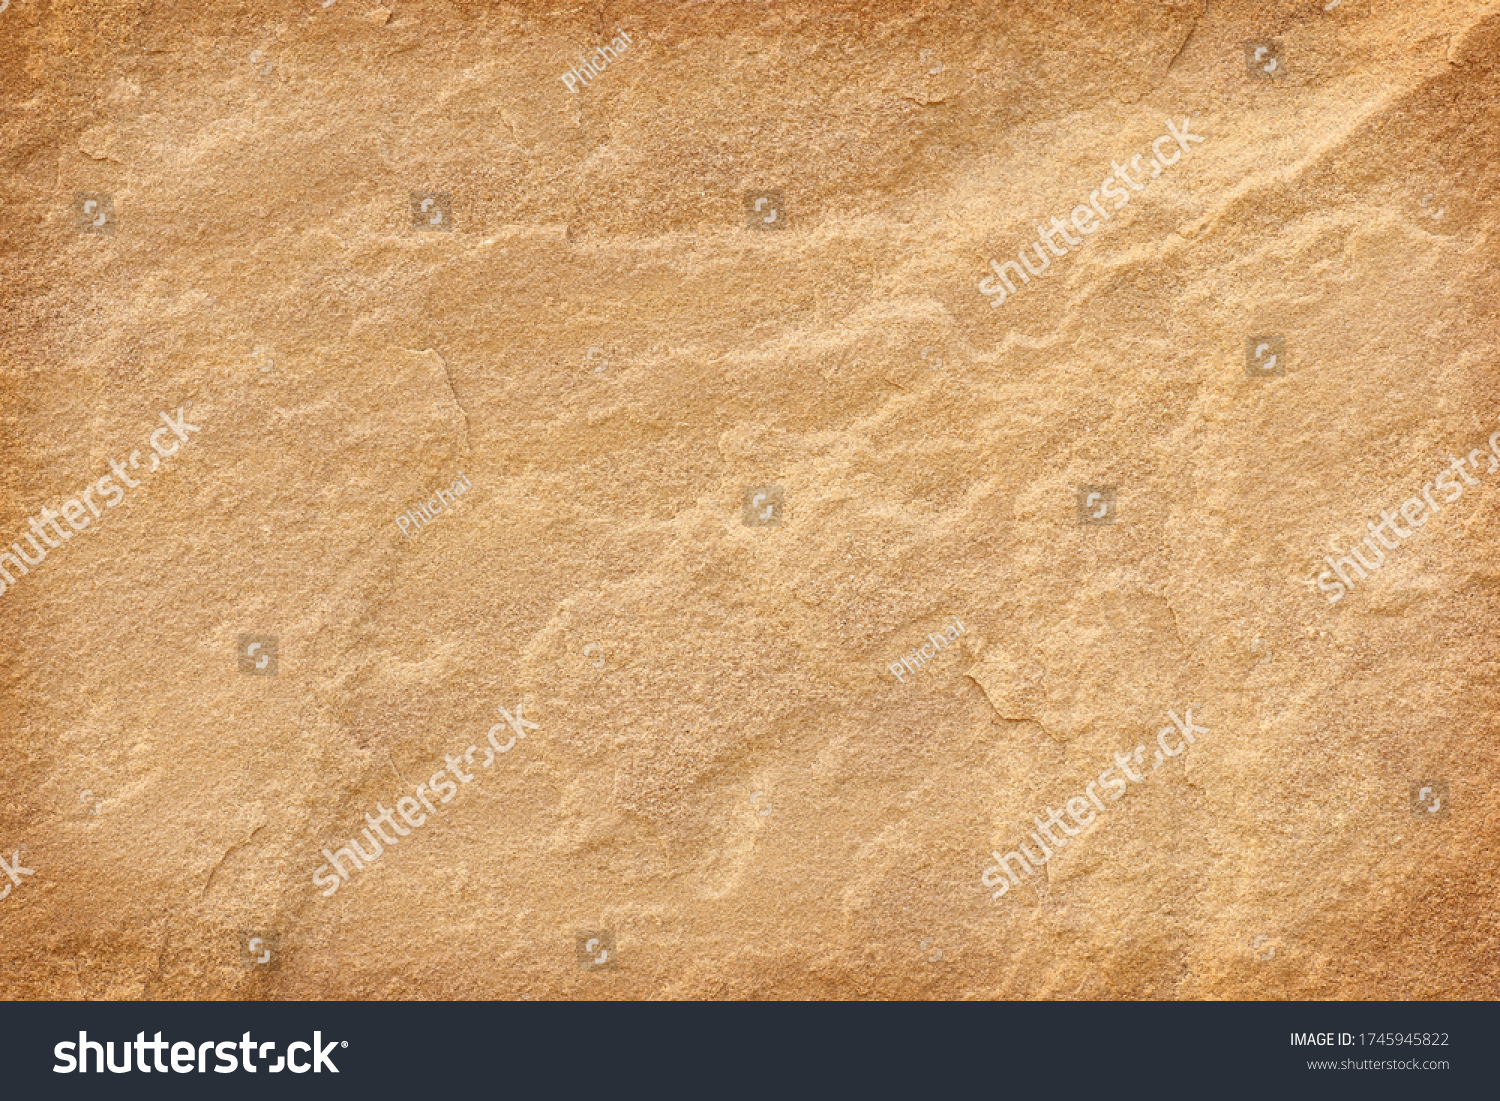 Details of sandstone texture background, brown nature stone background #1745945822